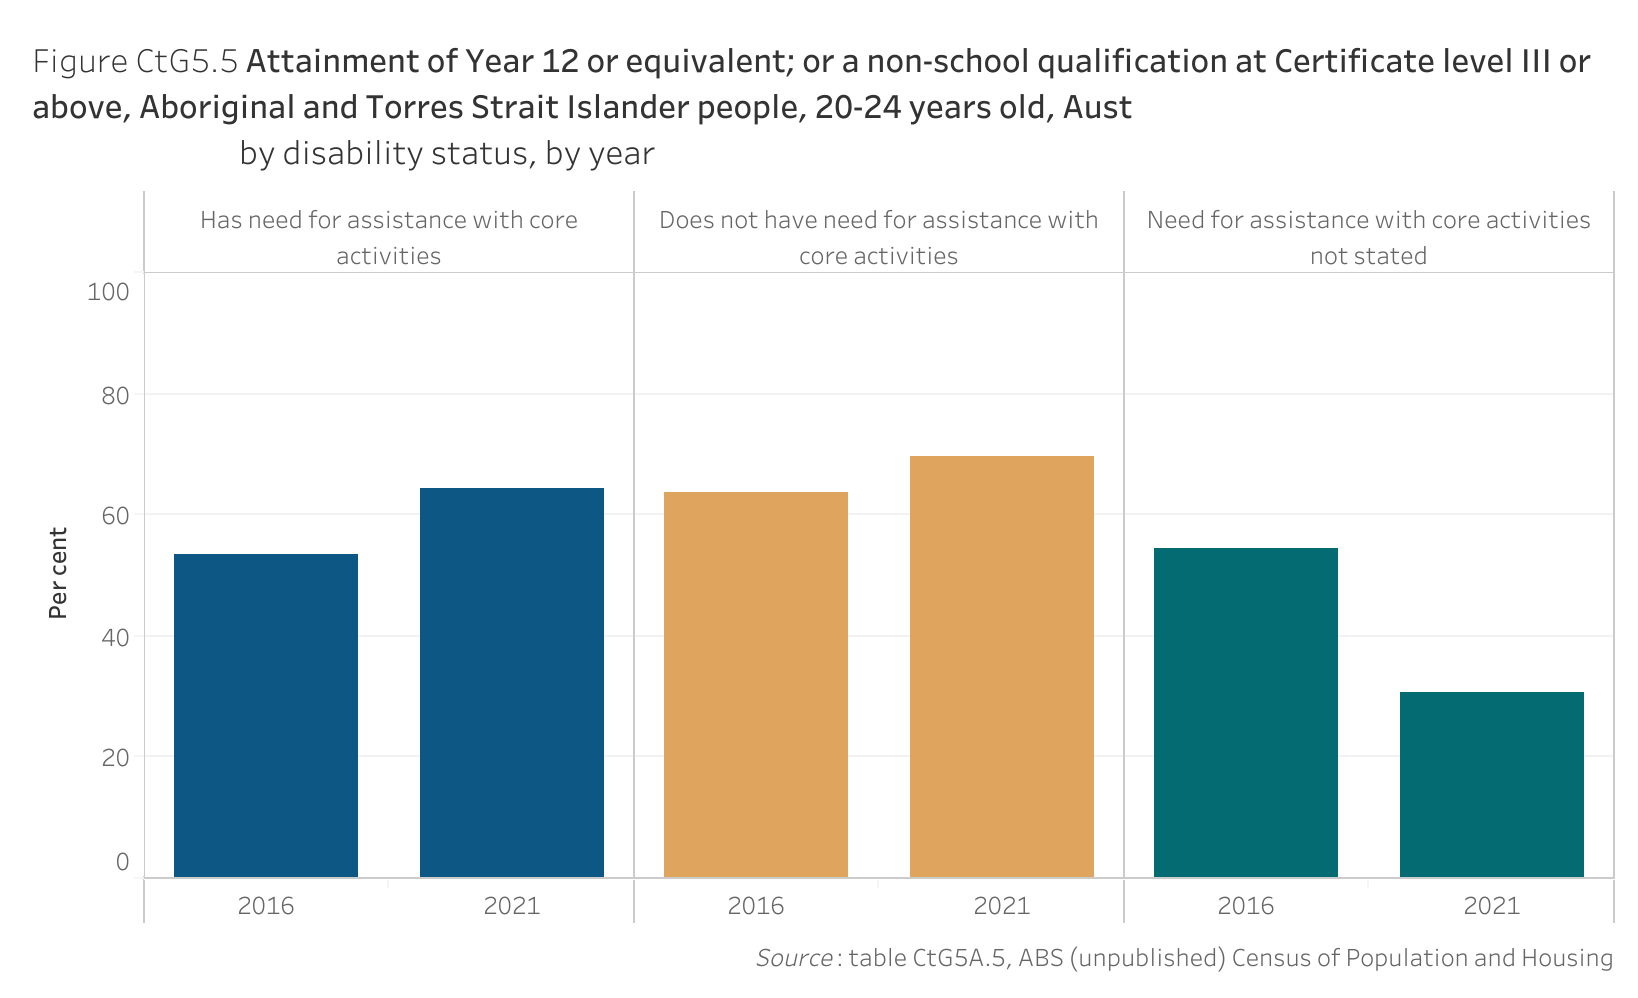 Figure CtG5.5 shows the attainment of Year 12 or equivalent; or a non-school qualification at Certificate level III or above, Aboriginal and Torres Strait Islander people, 20-24 years old, Australia, by disability status, by year. More details can be found within the text near this image.